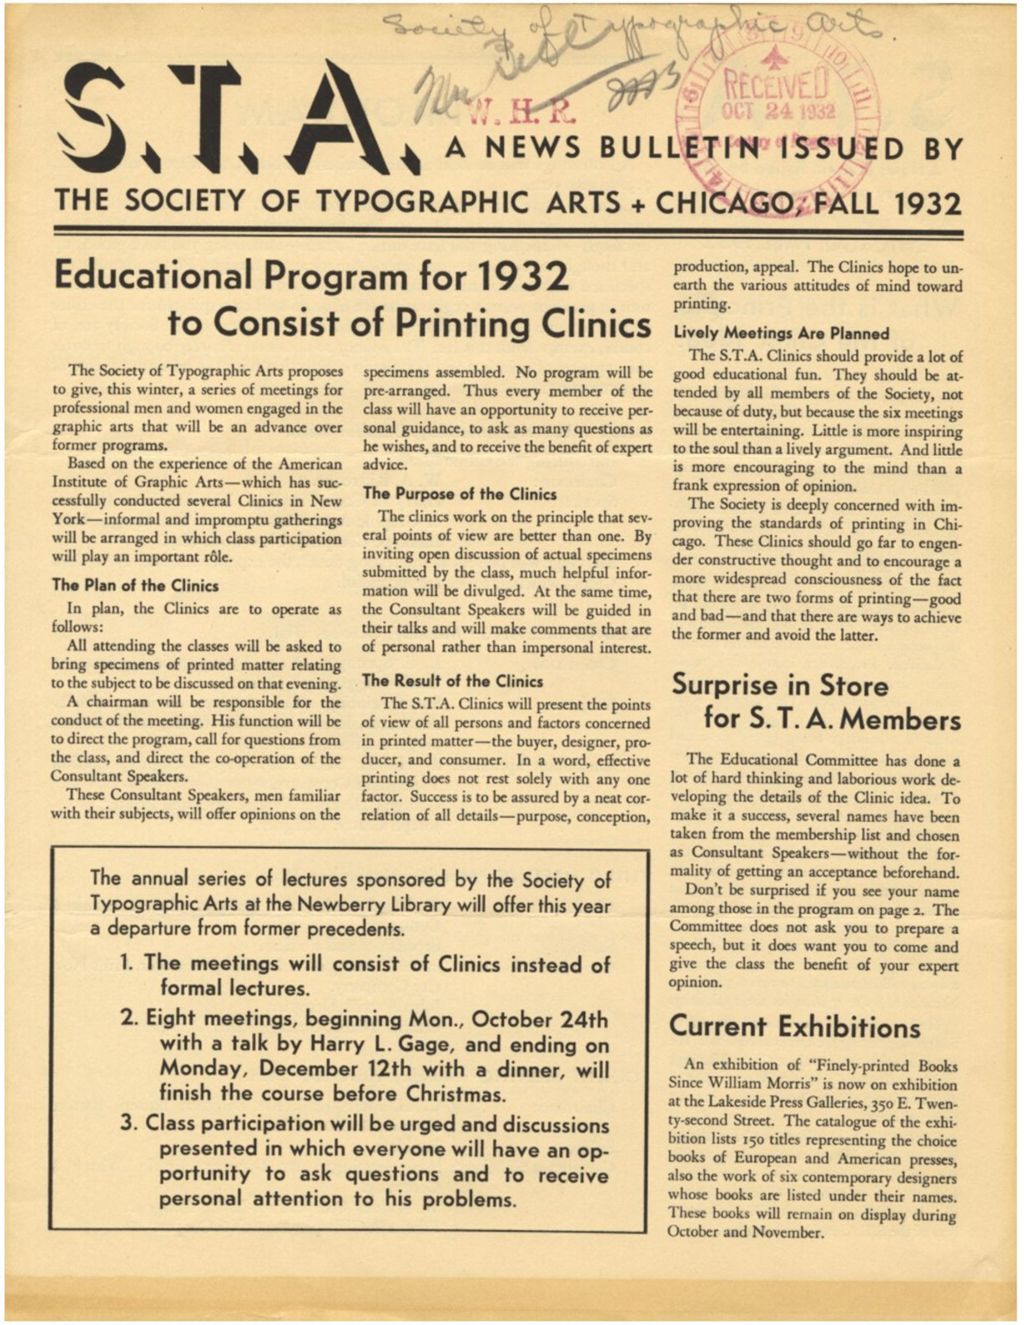 STA News Bulletin noting development of plans for a Graphic Arts Exhibit at the Century of Progress